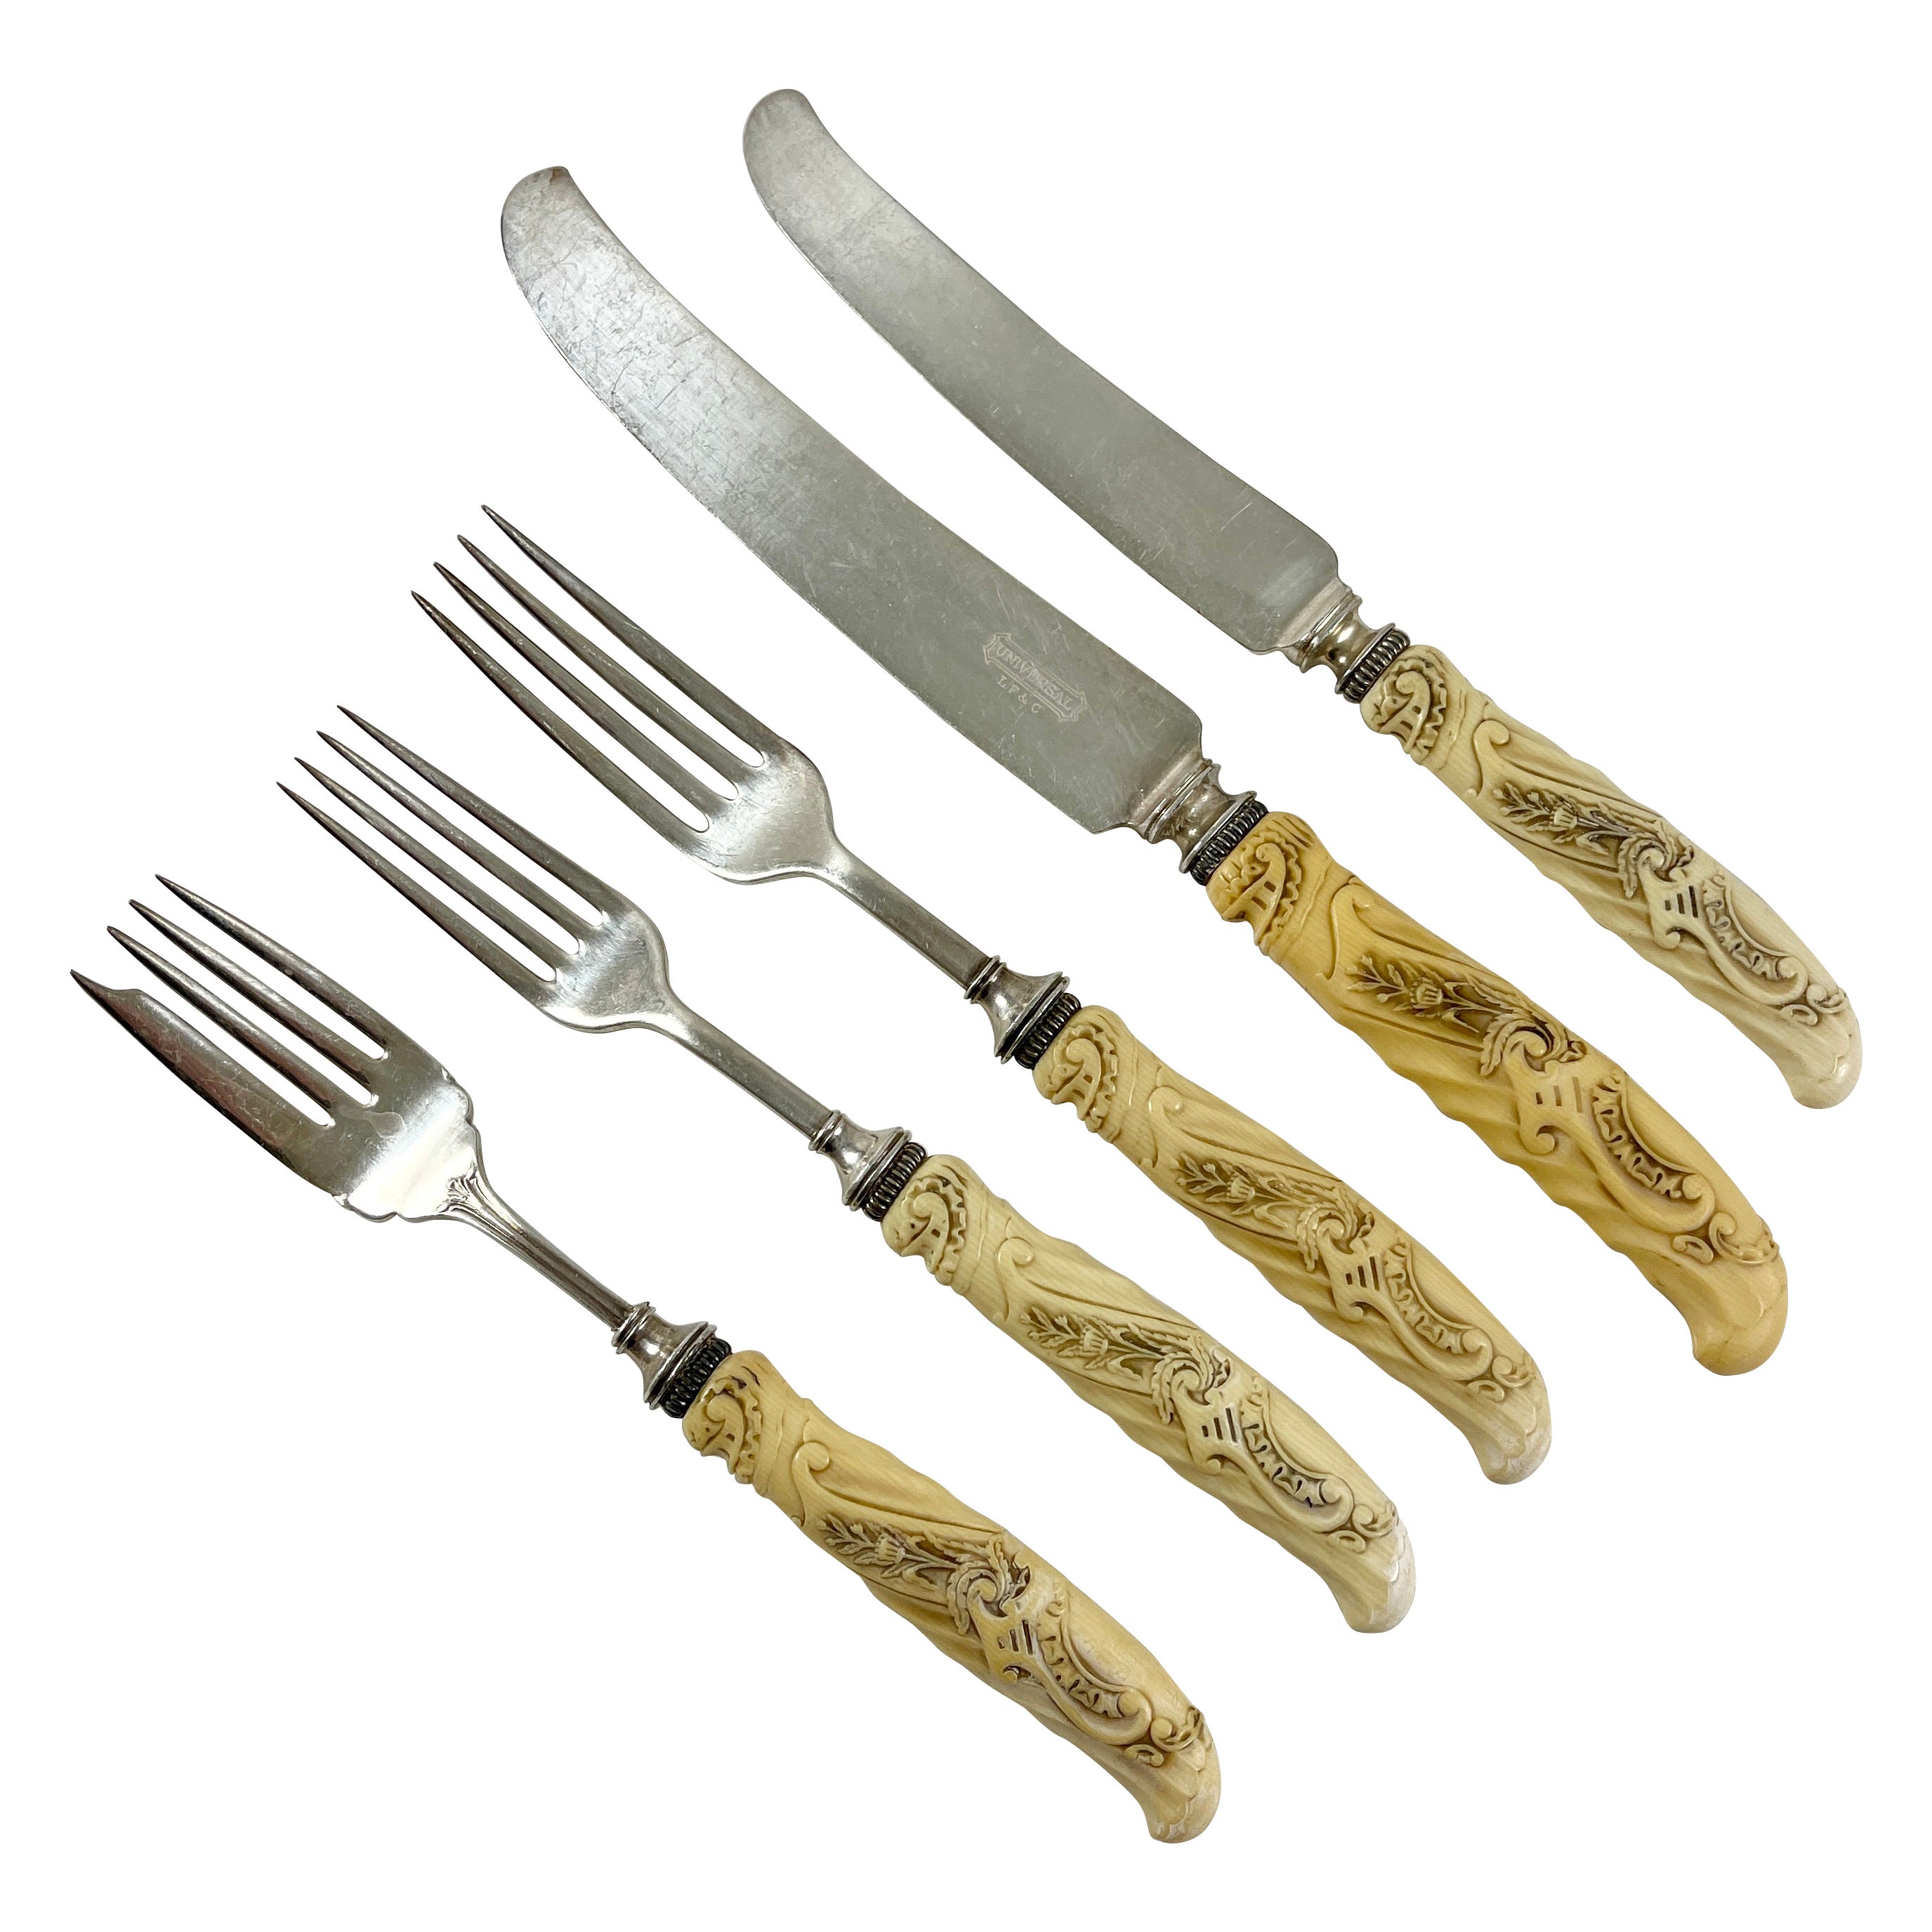 Landers, Frary, and Clark Carving Set